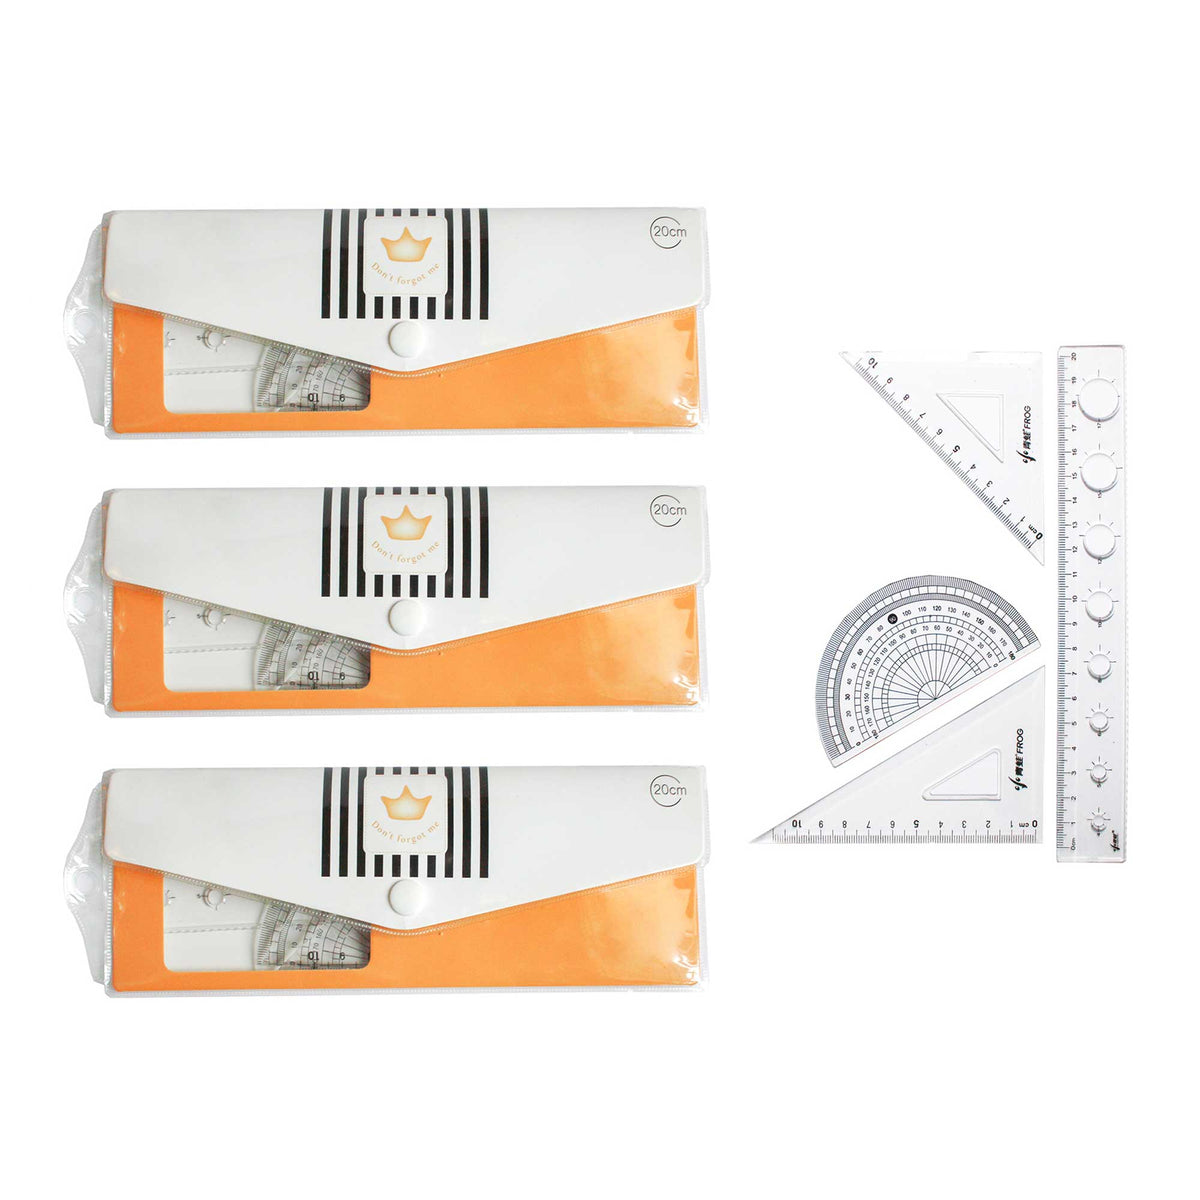 Geometry Set for Students - 20cm Ruler, Protractor, and Triangle Set (Orange, Pack of 3)